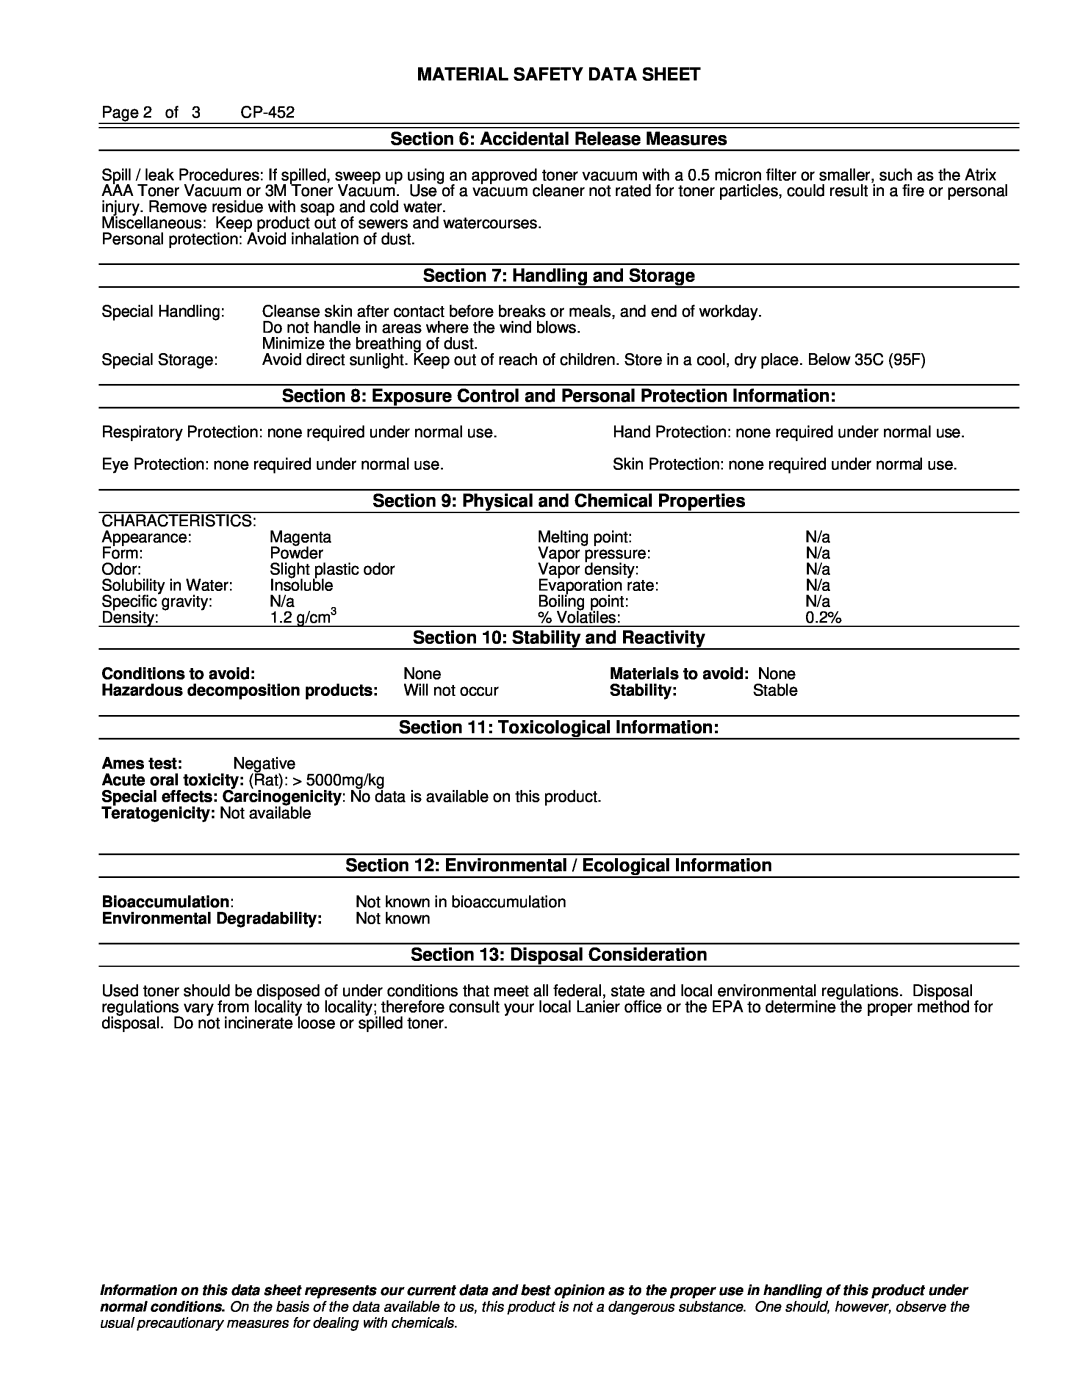 Lanier LD160C Material Safety Data Sheet, Accidental Release Measures, Handling and Storage, Stability and Reactivity 